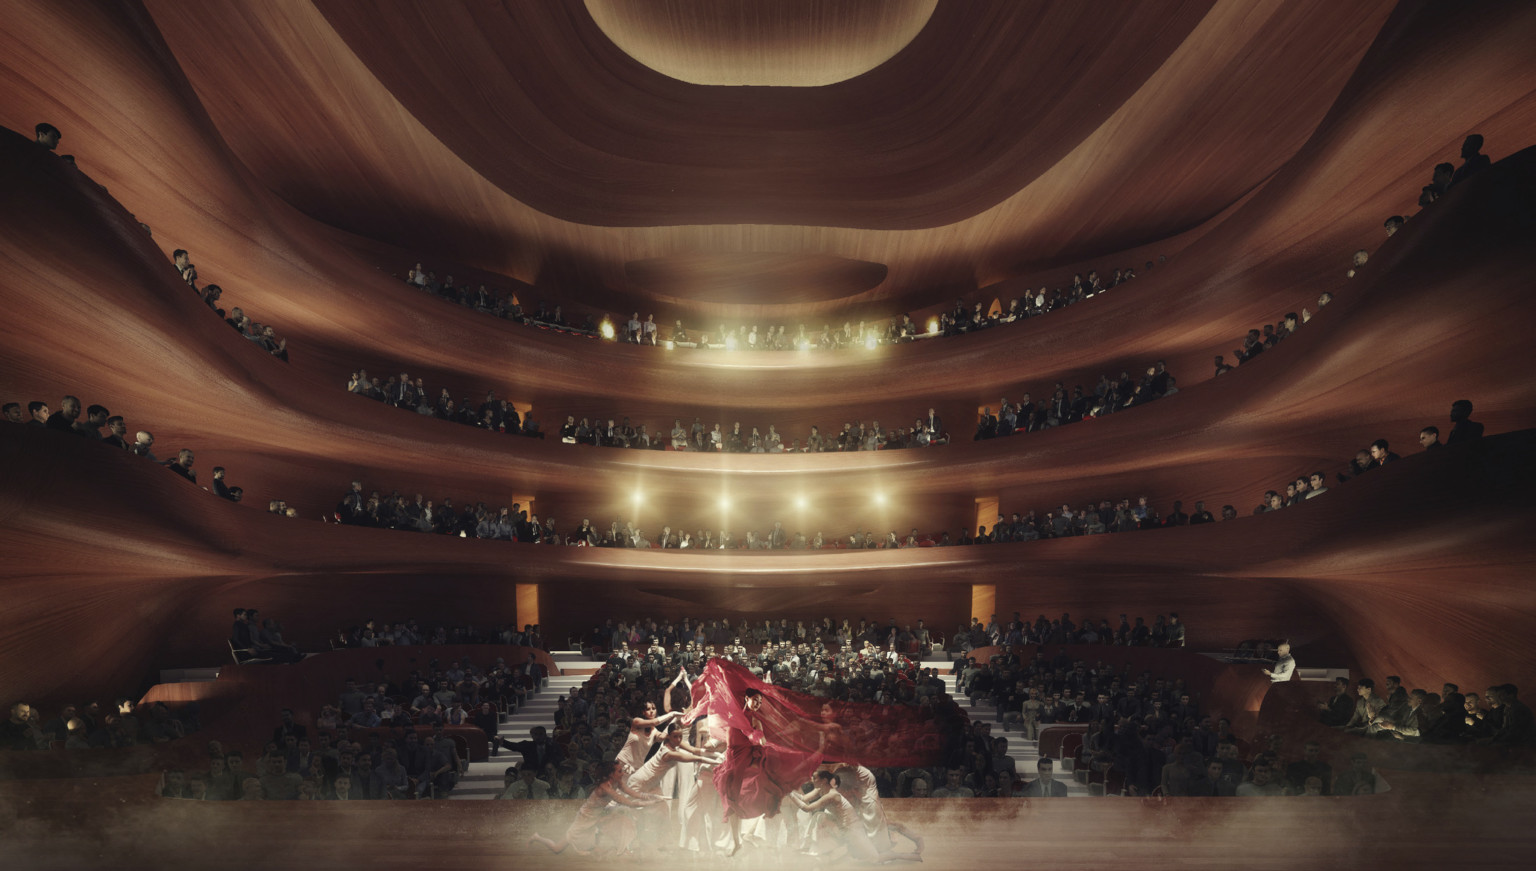 Downstage view of dancers with red cloth lit from above center in front of audience at ground level and 3 balconies